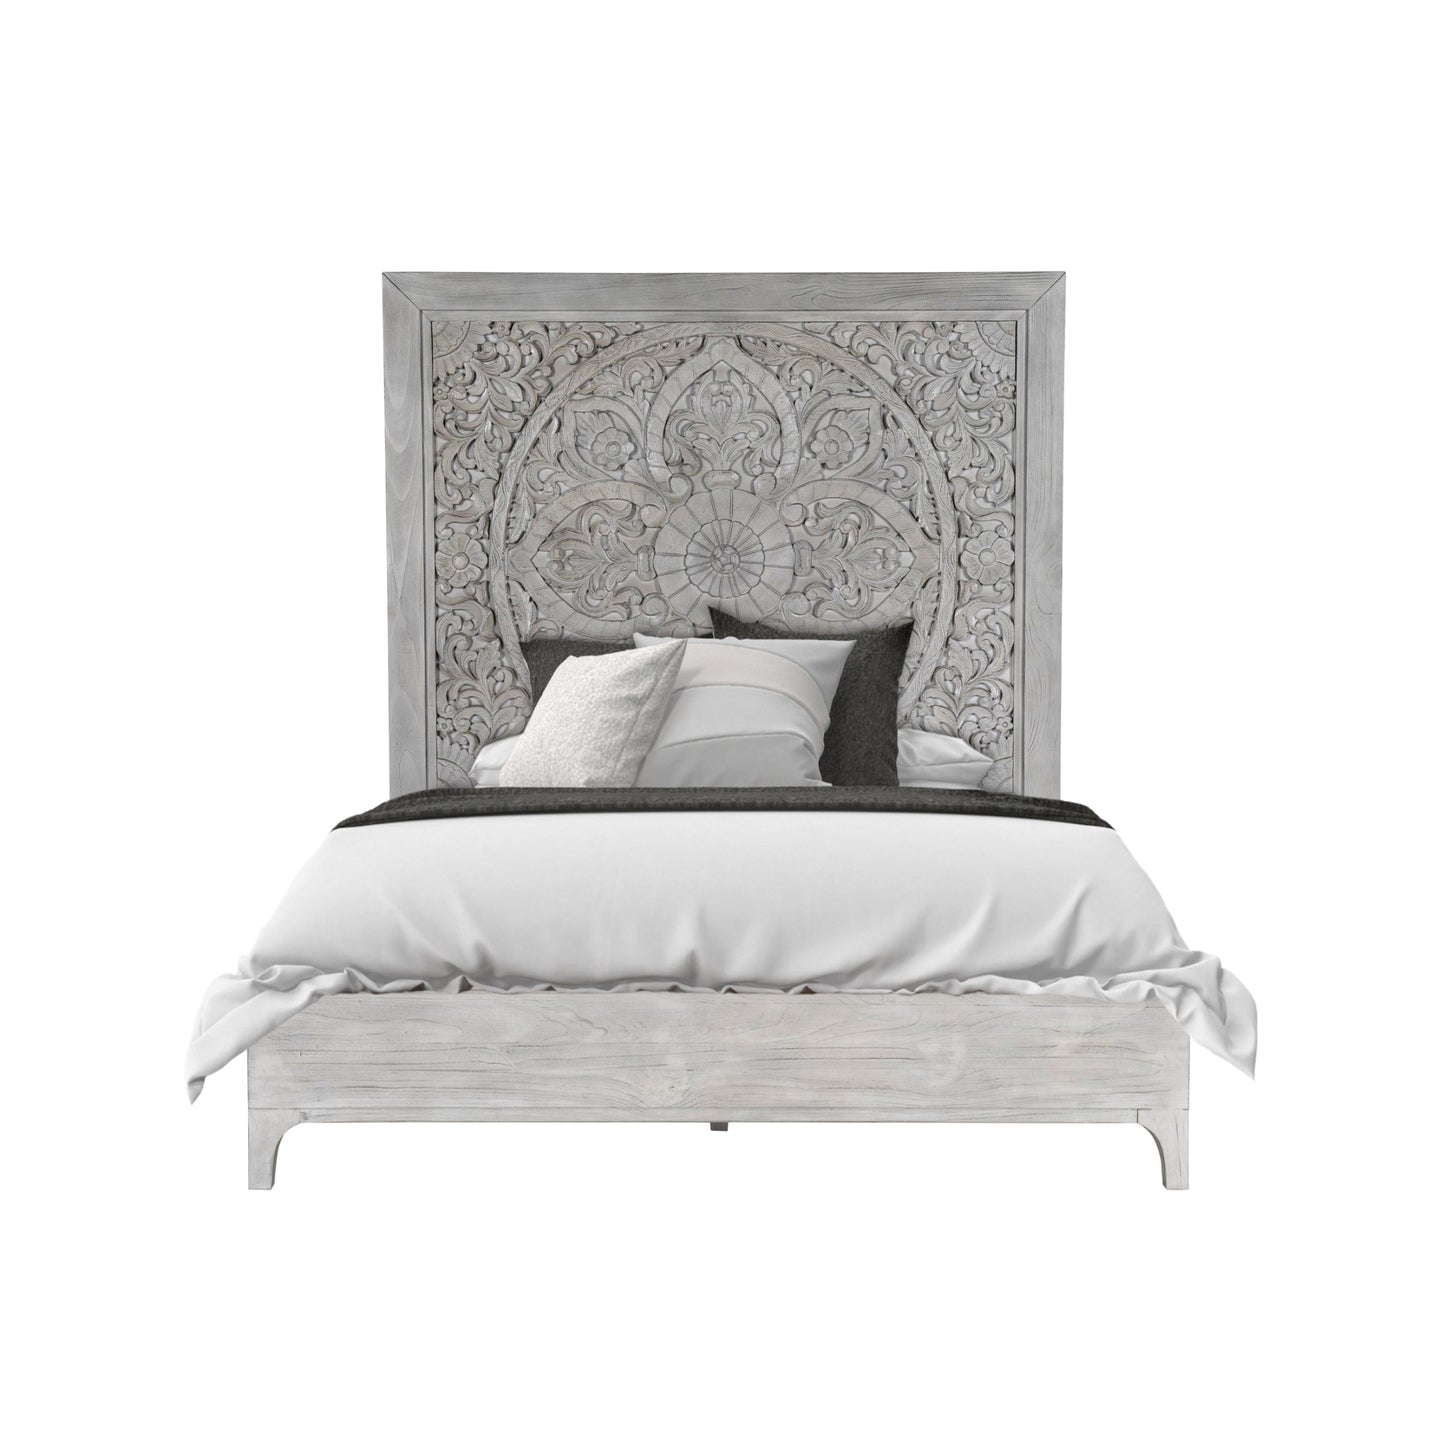 Modus Boho Chic Queen Bed in Washed White